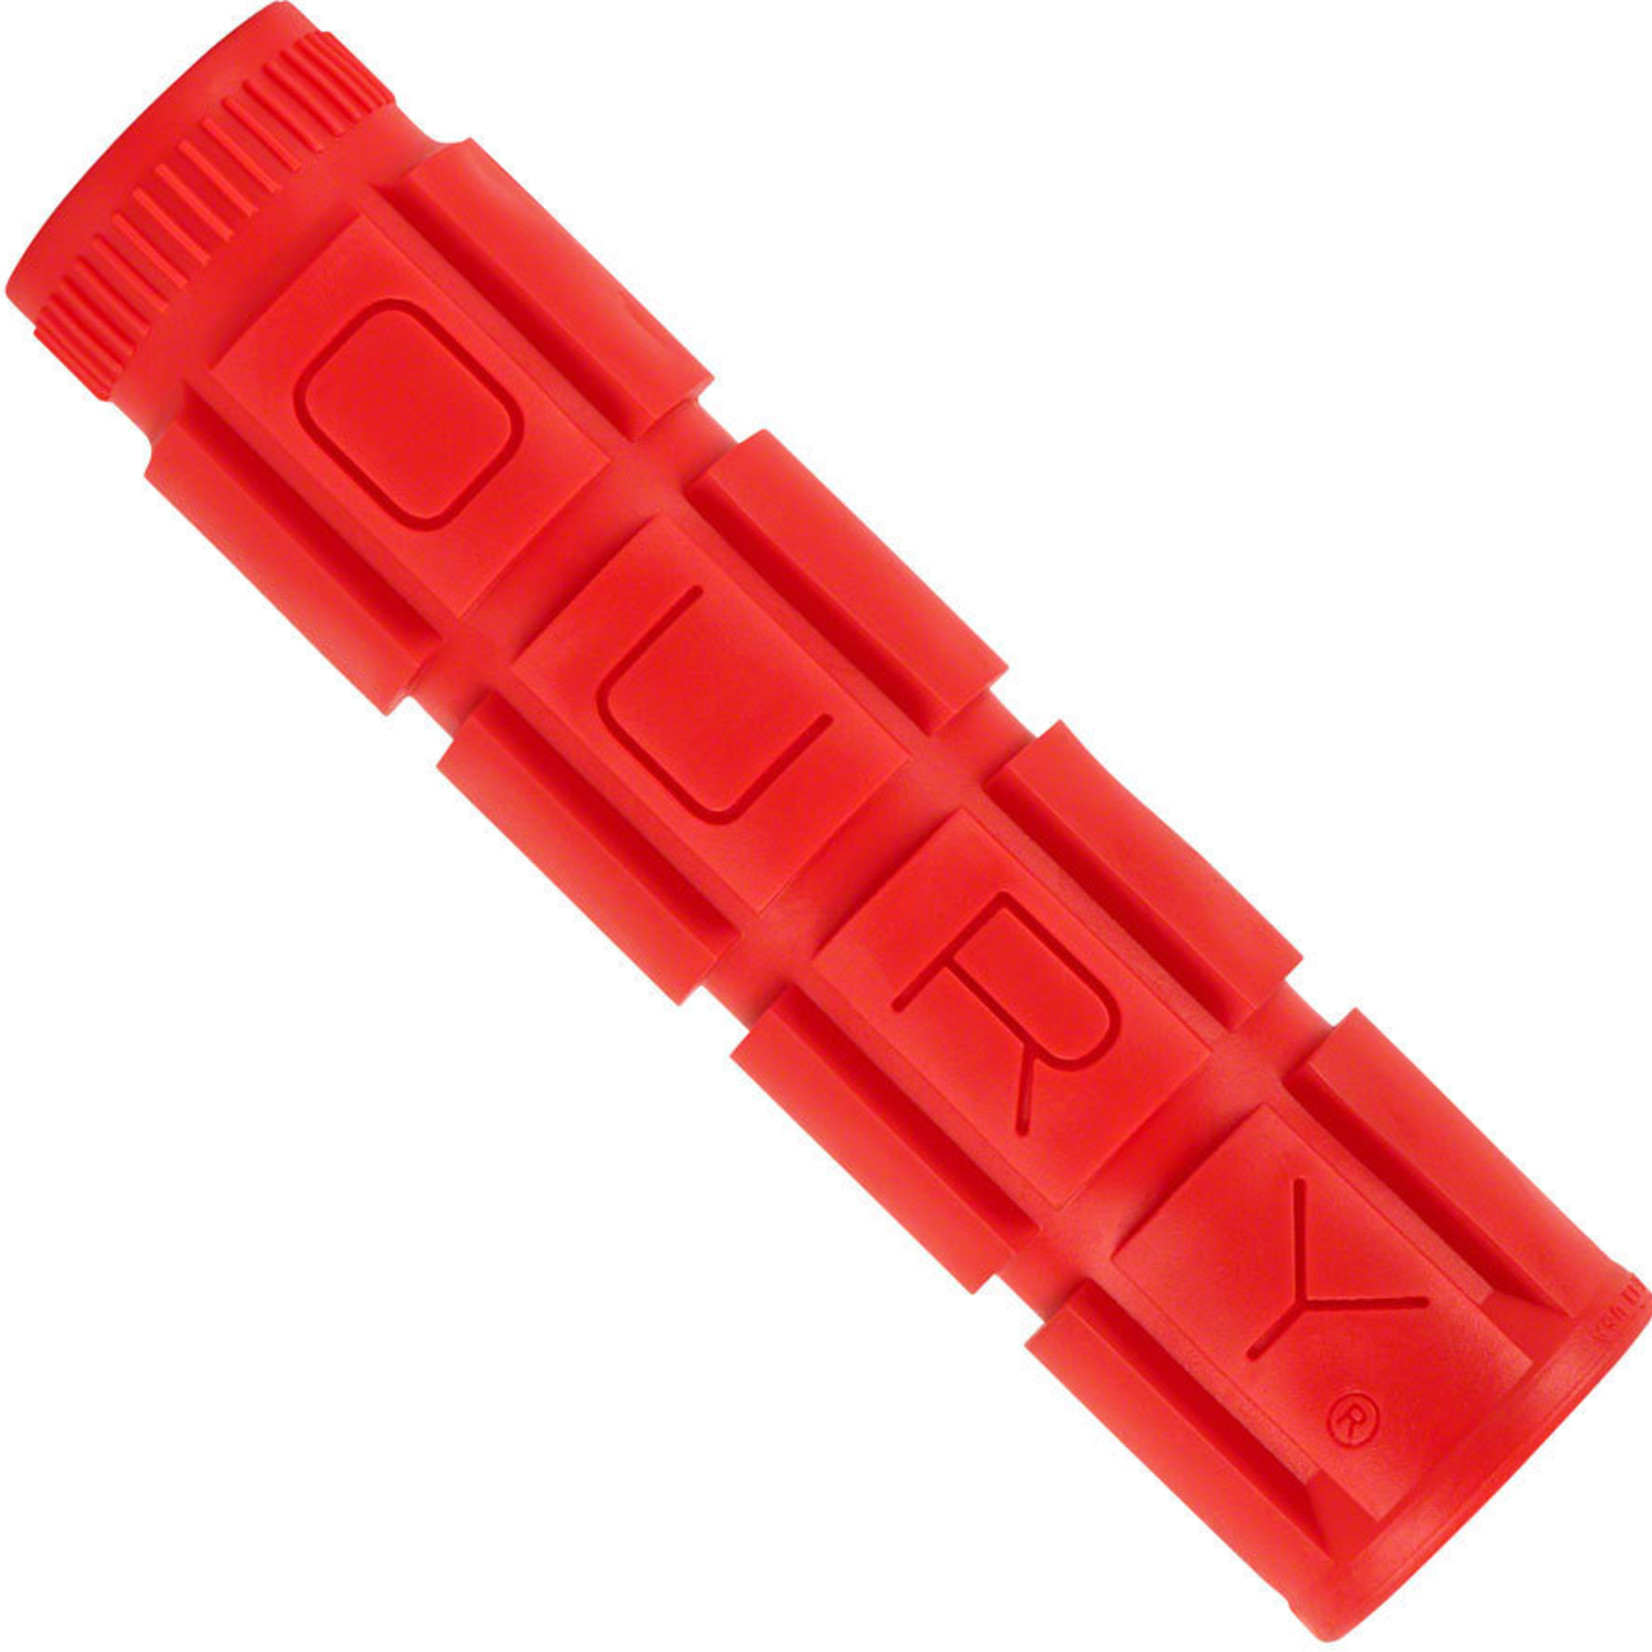 Oury Oury Grips